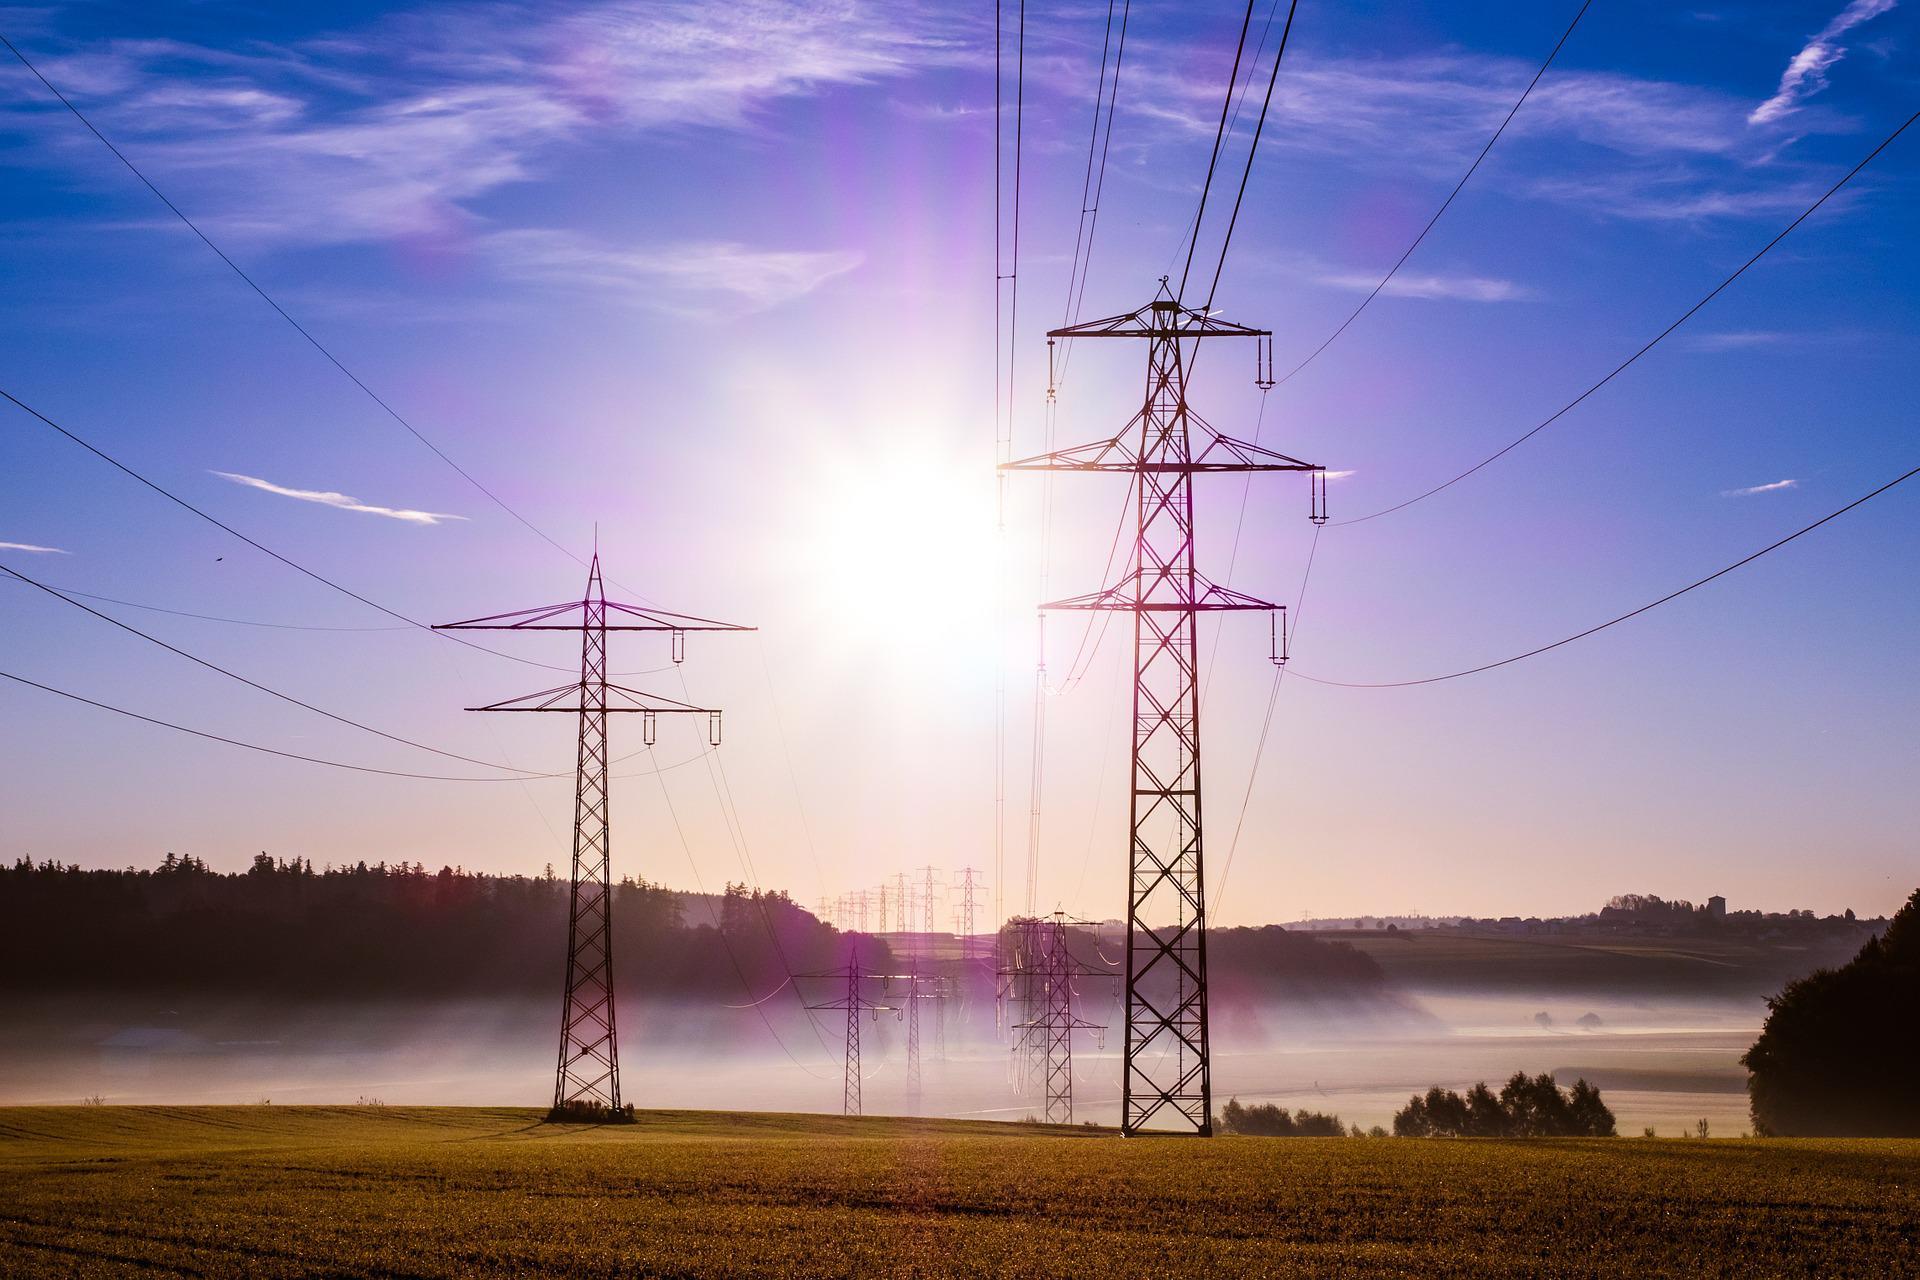 Product Reforms to the Regulations of the Organic Law of the Public Electricity Service - AVL Abogados  image